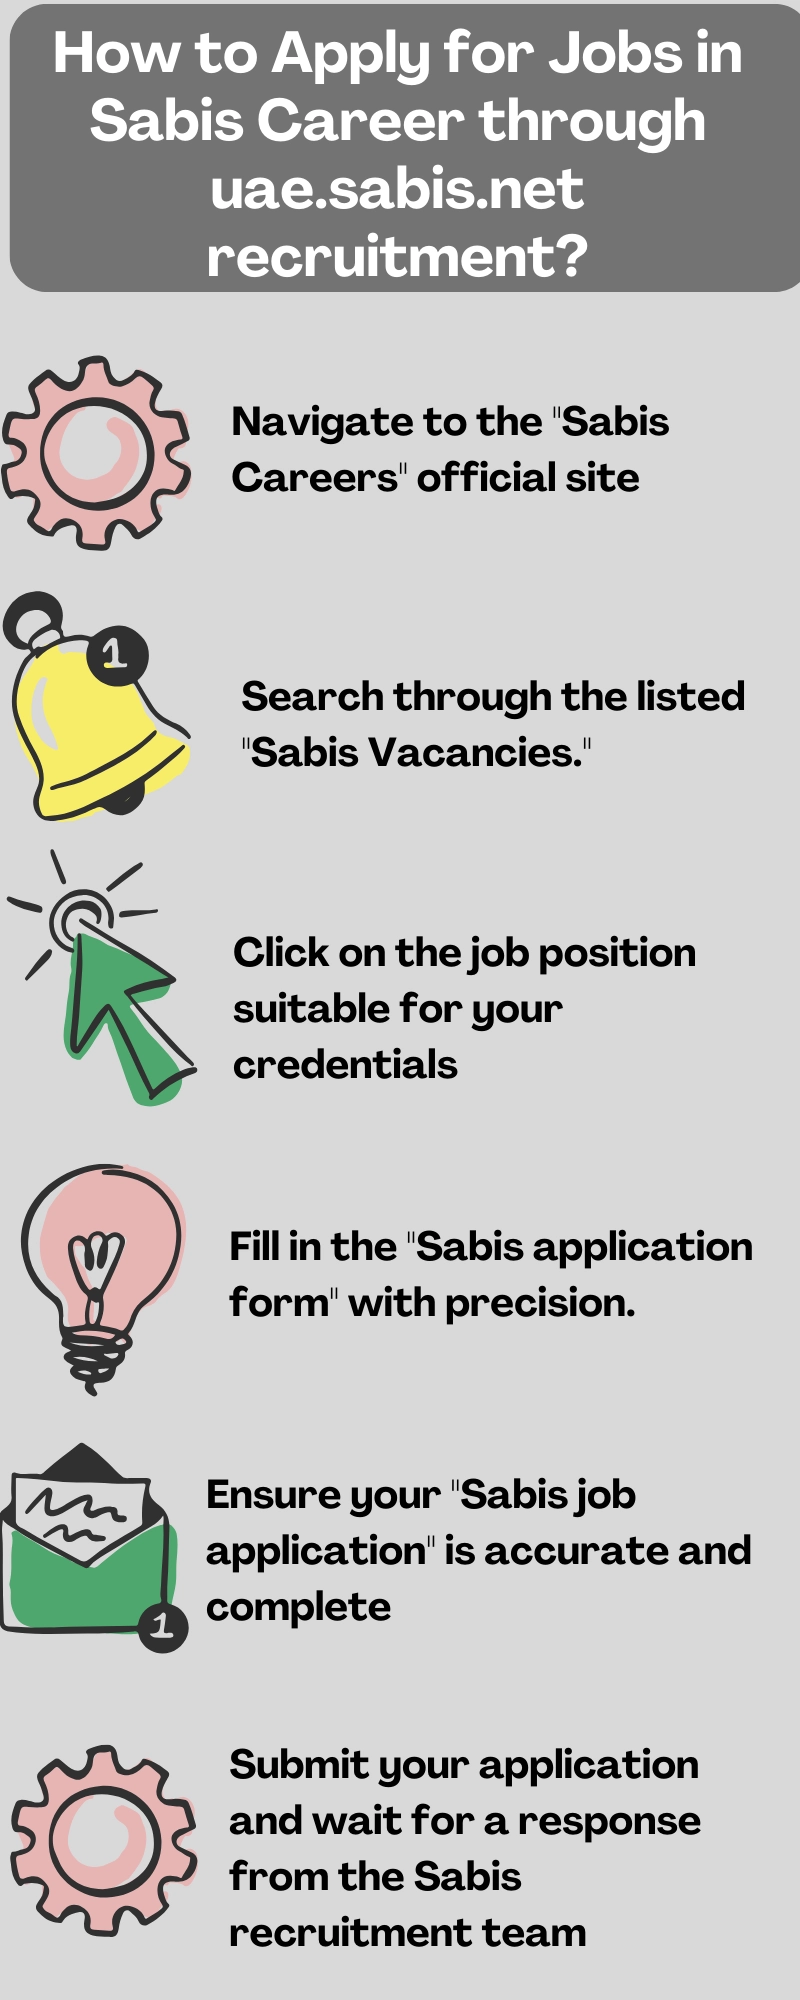 How to Apply for Jobs in Sabis Career through uae.sabis.net recruitment?